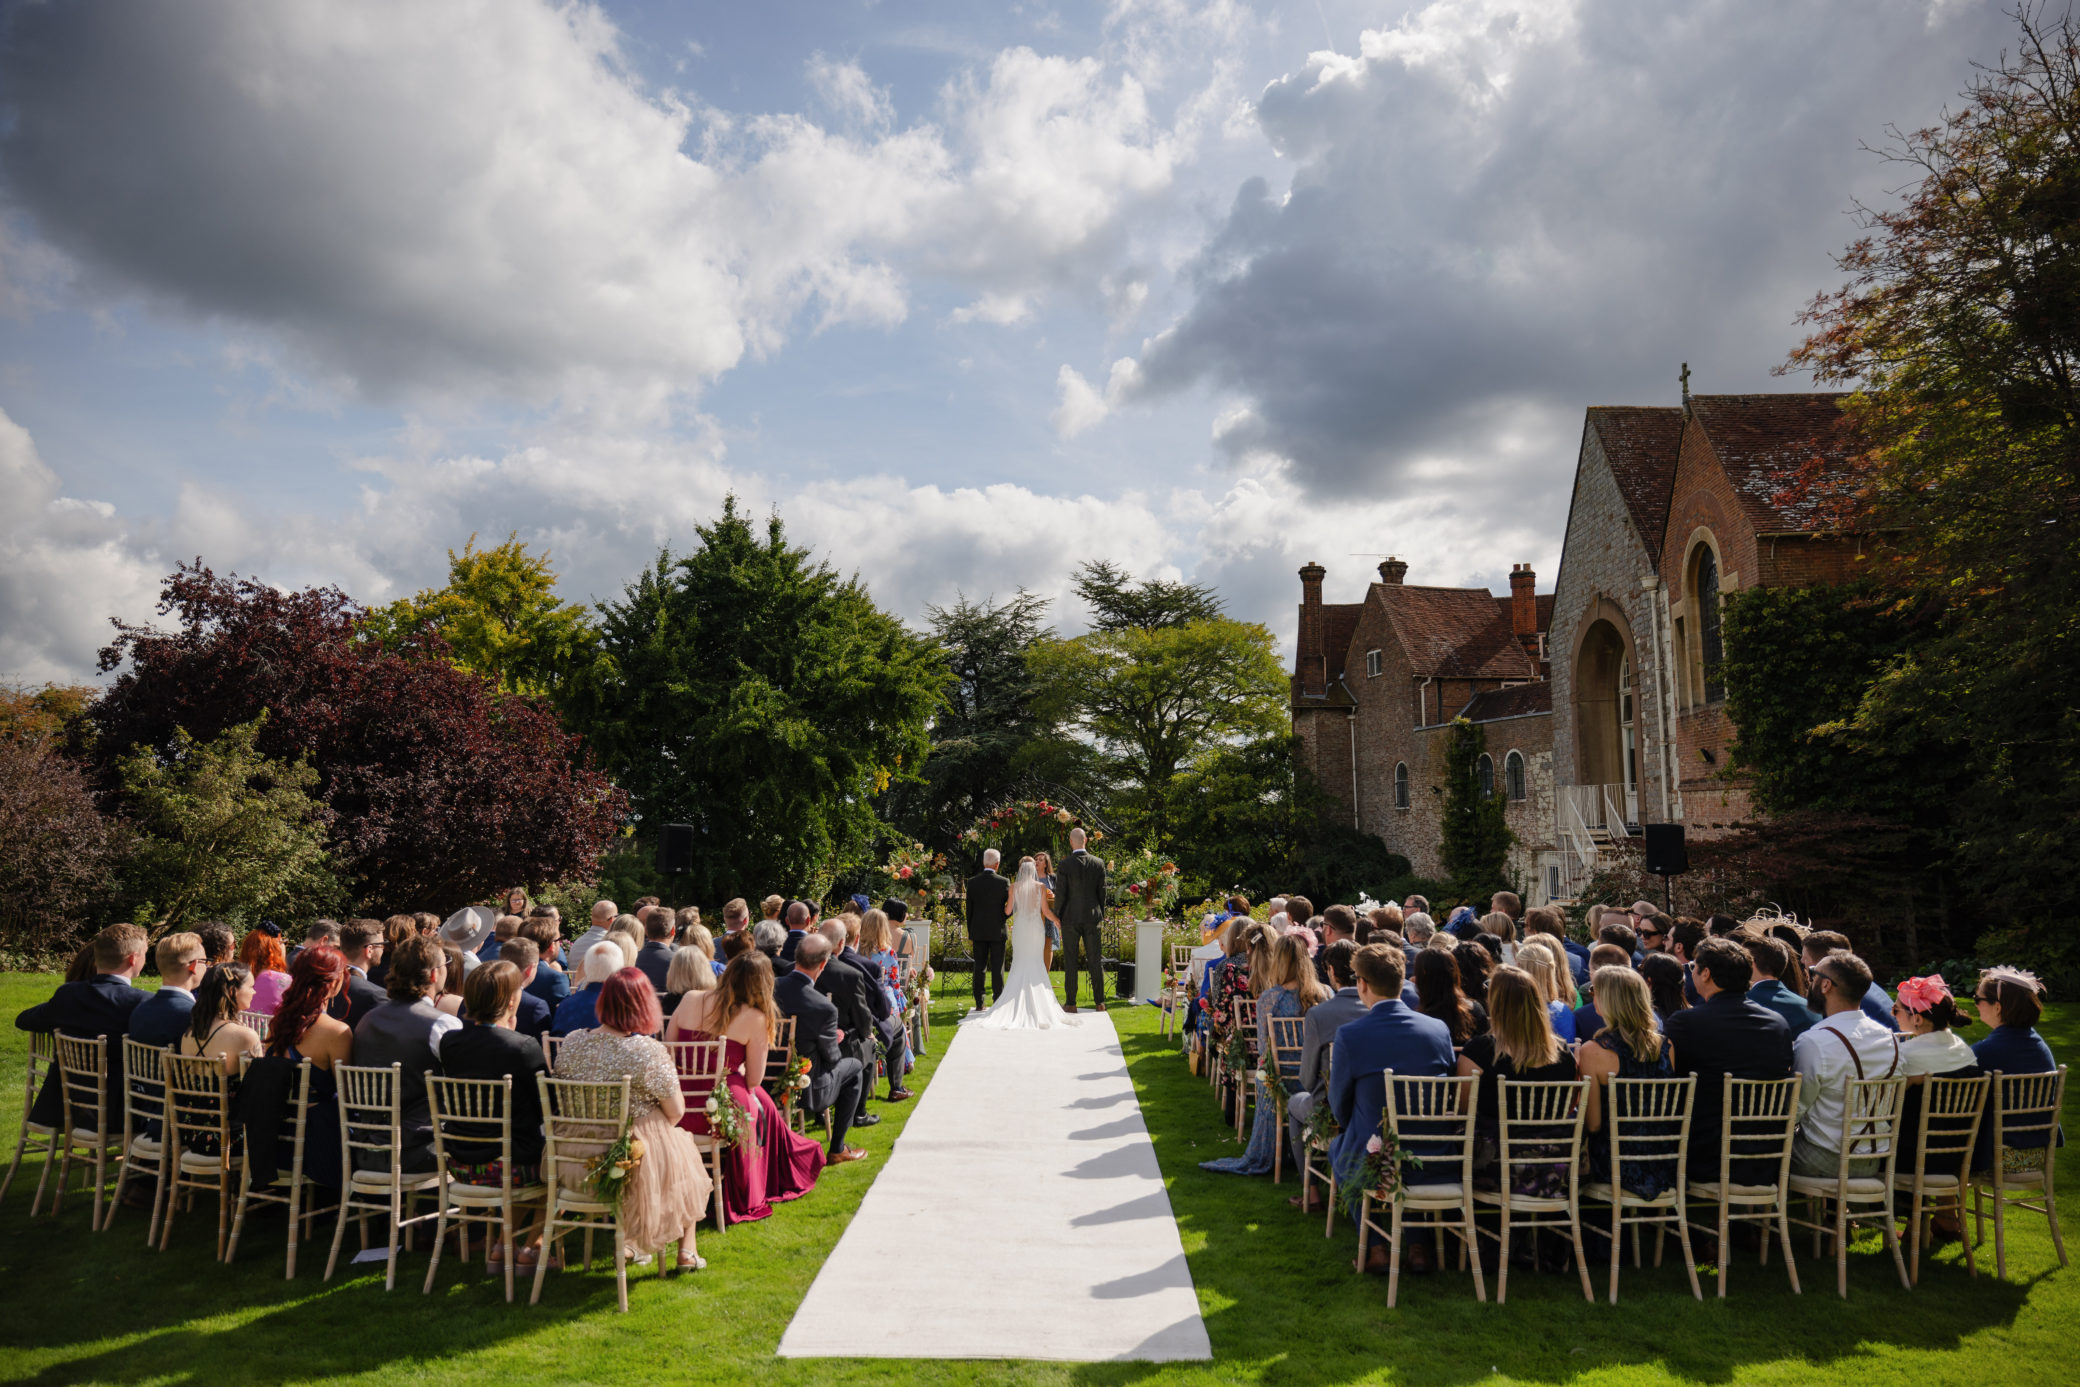 Outdoor wedding on the East Lawn at Farnham Castle